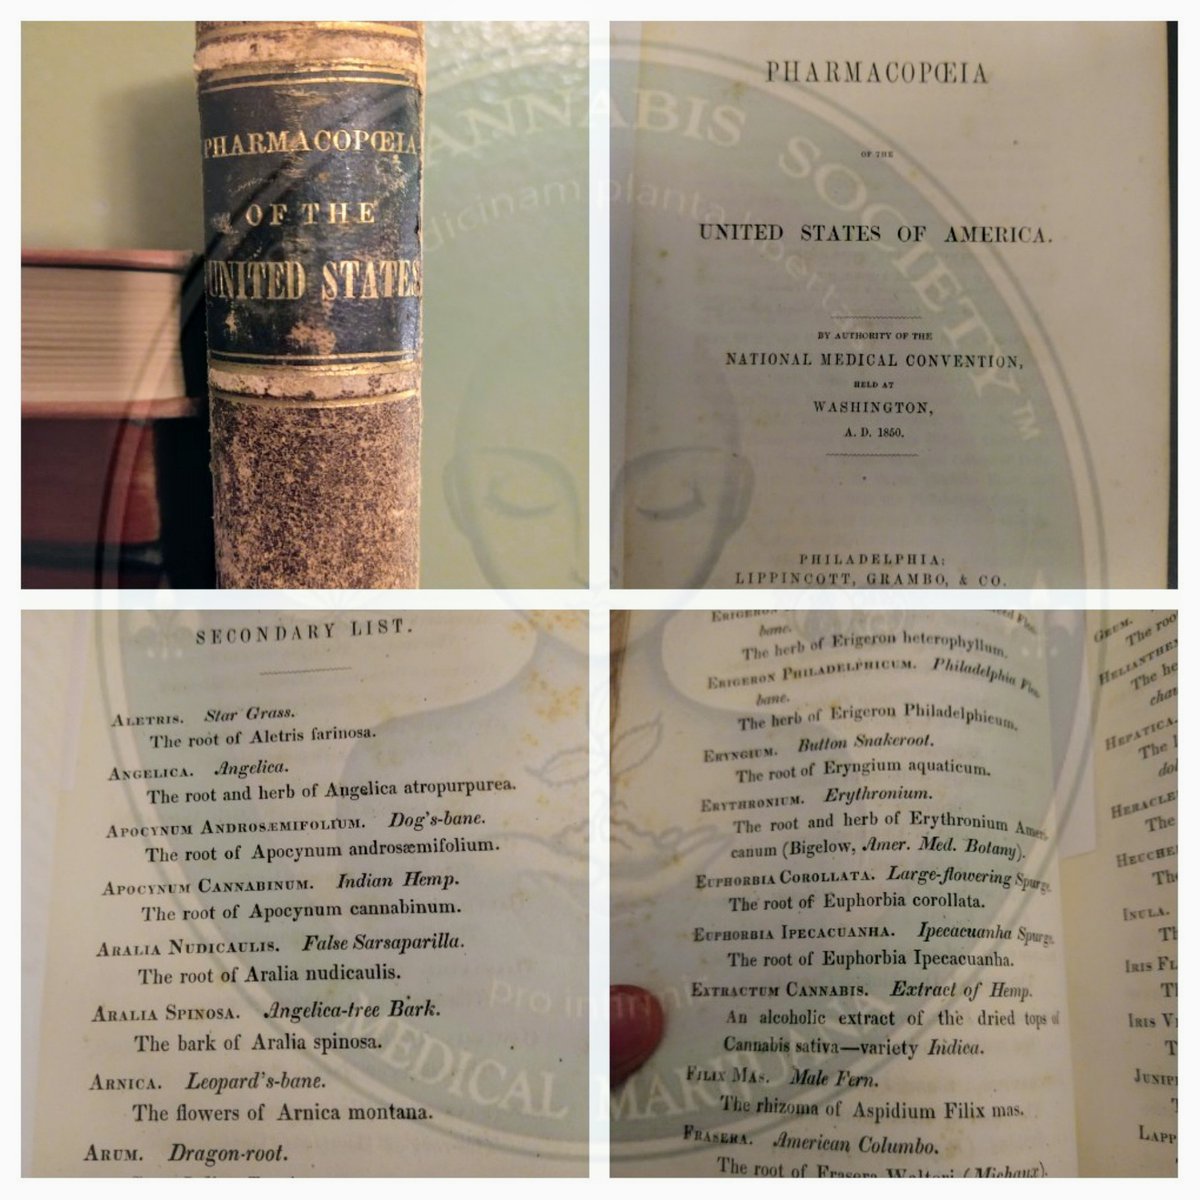 Did you know... back in 1850 the terms #Cannabis , #Hemp , #Sativa and #Indica were first introduced to #ModernMedicine through the Pharmacopeia of The United States. Cannabis has Always! been medicine. This book is 170yrs old #TBT